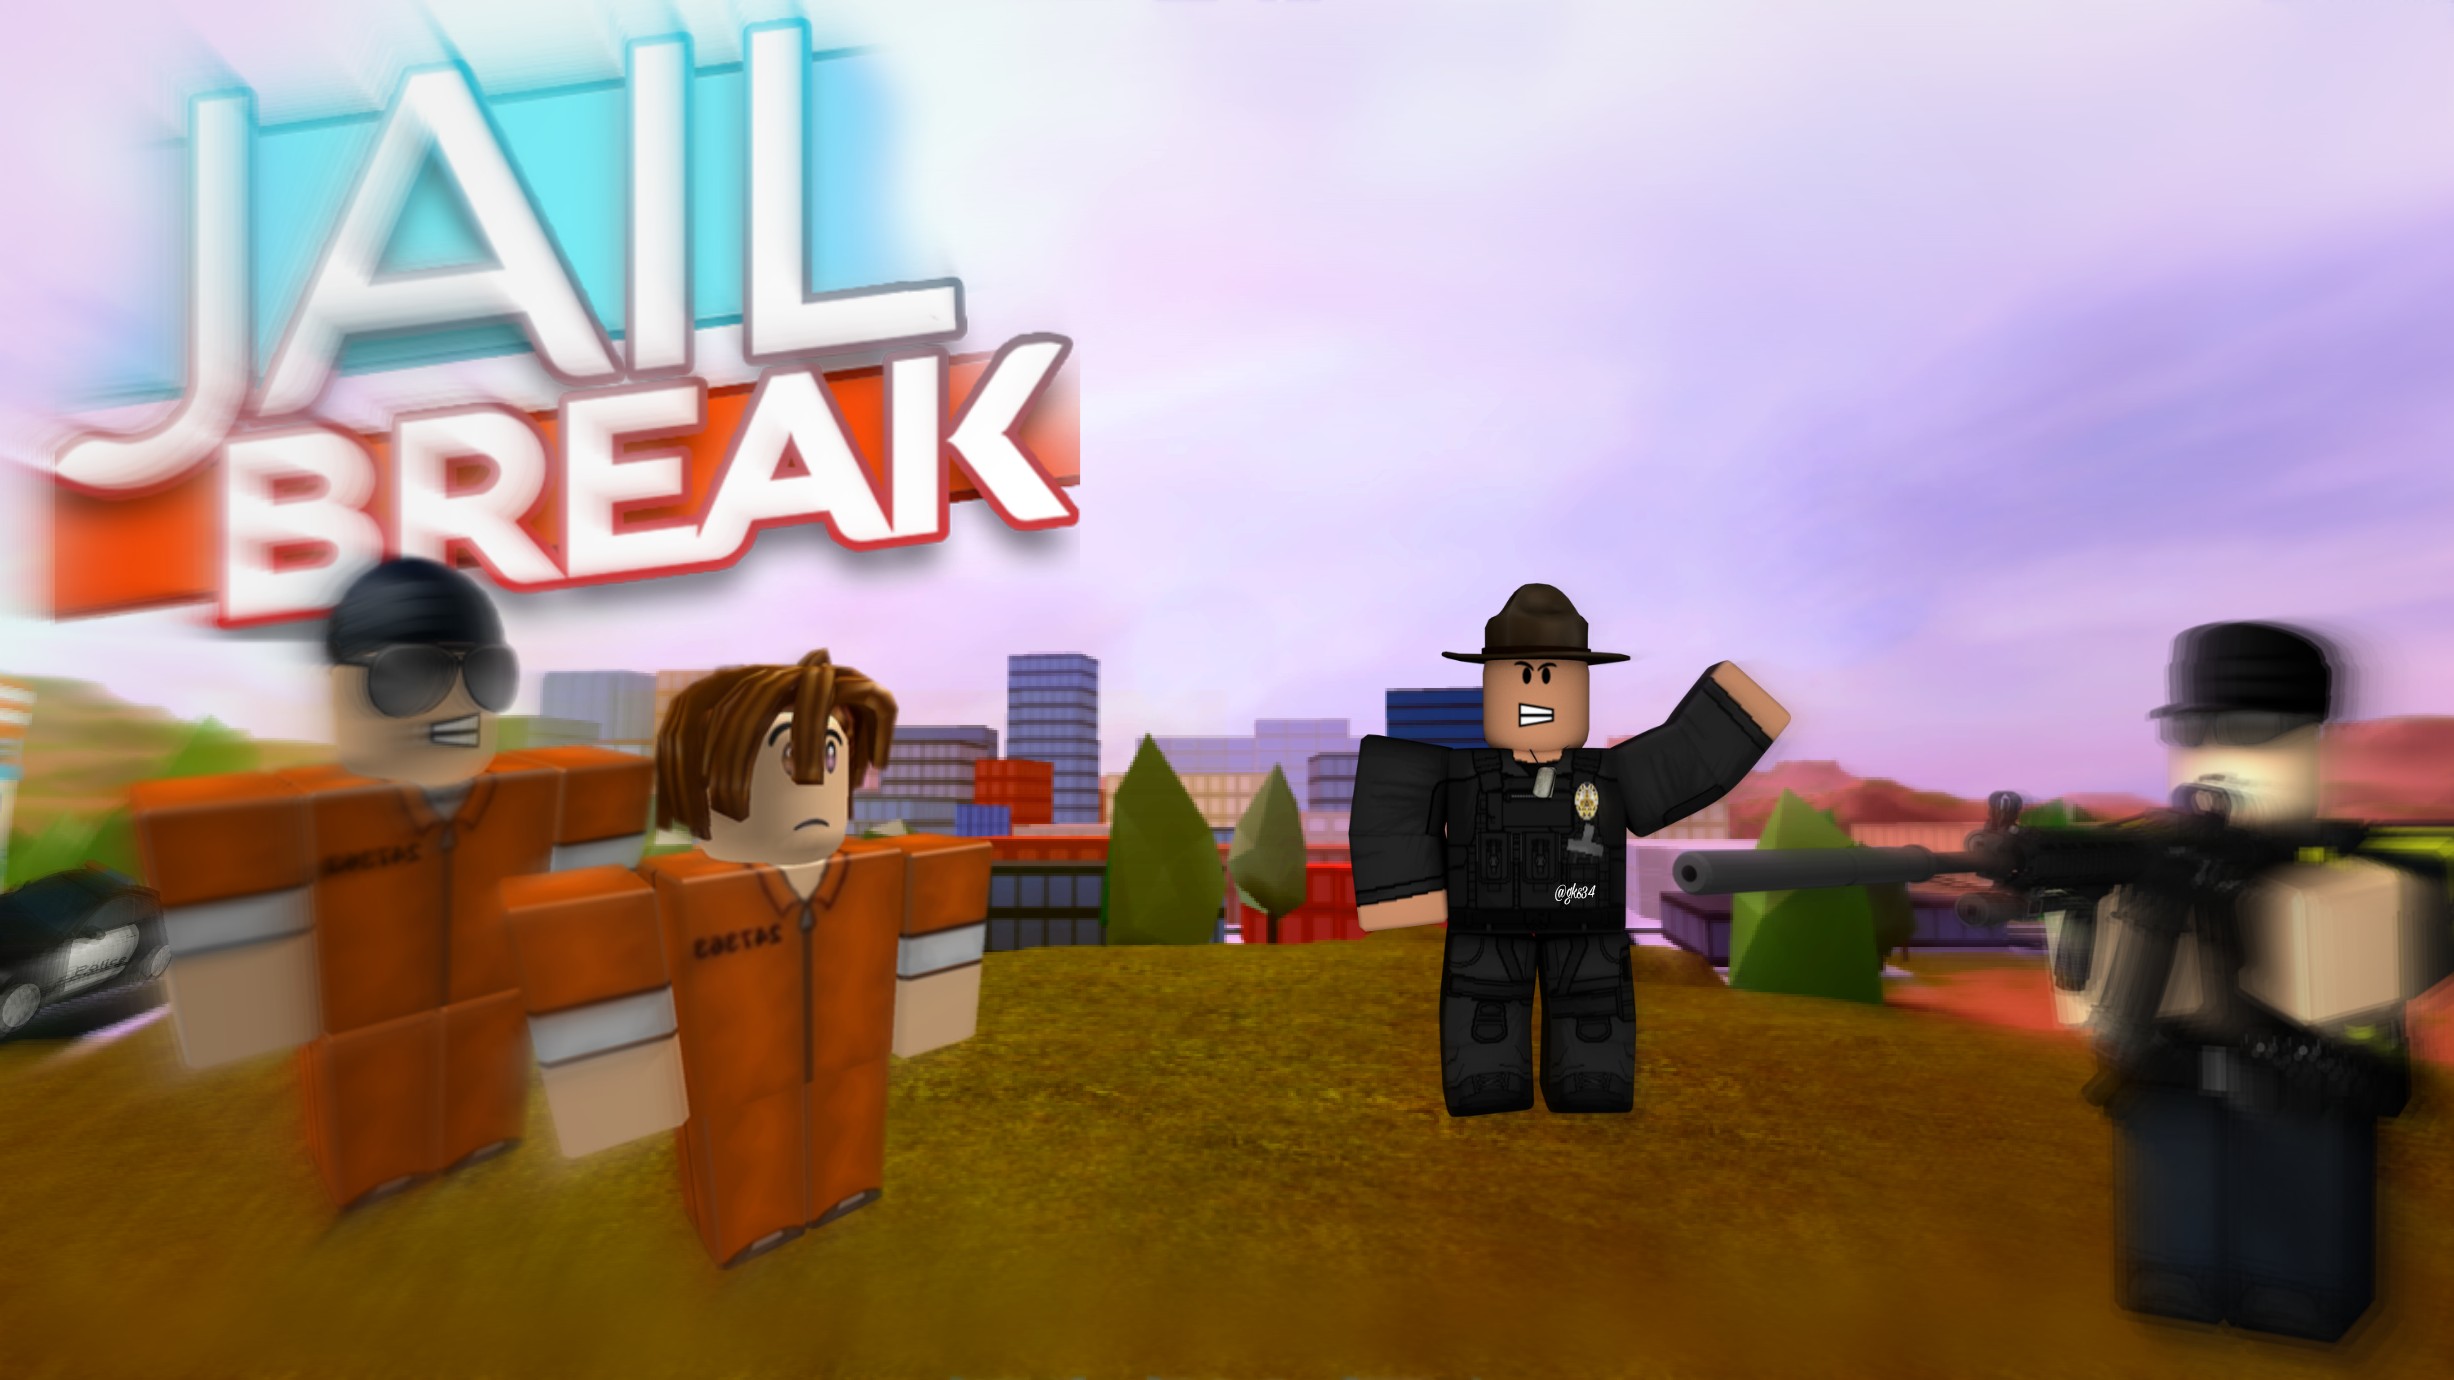 Roblox Jailbreak Get Robux Gg - escaping prison the cheat way roblox prison life youtube